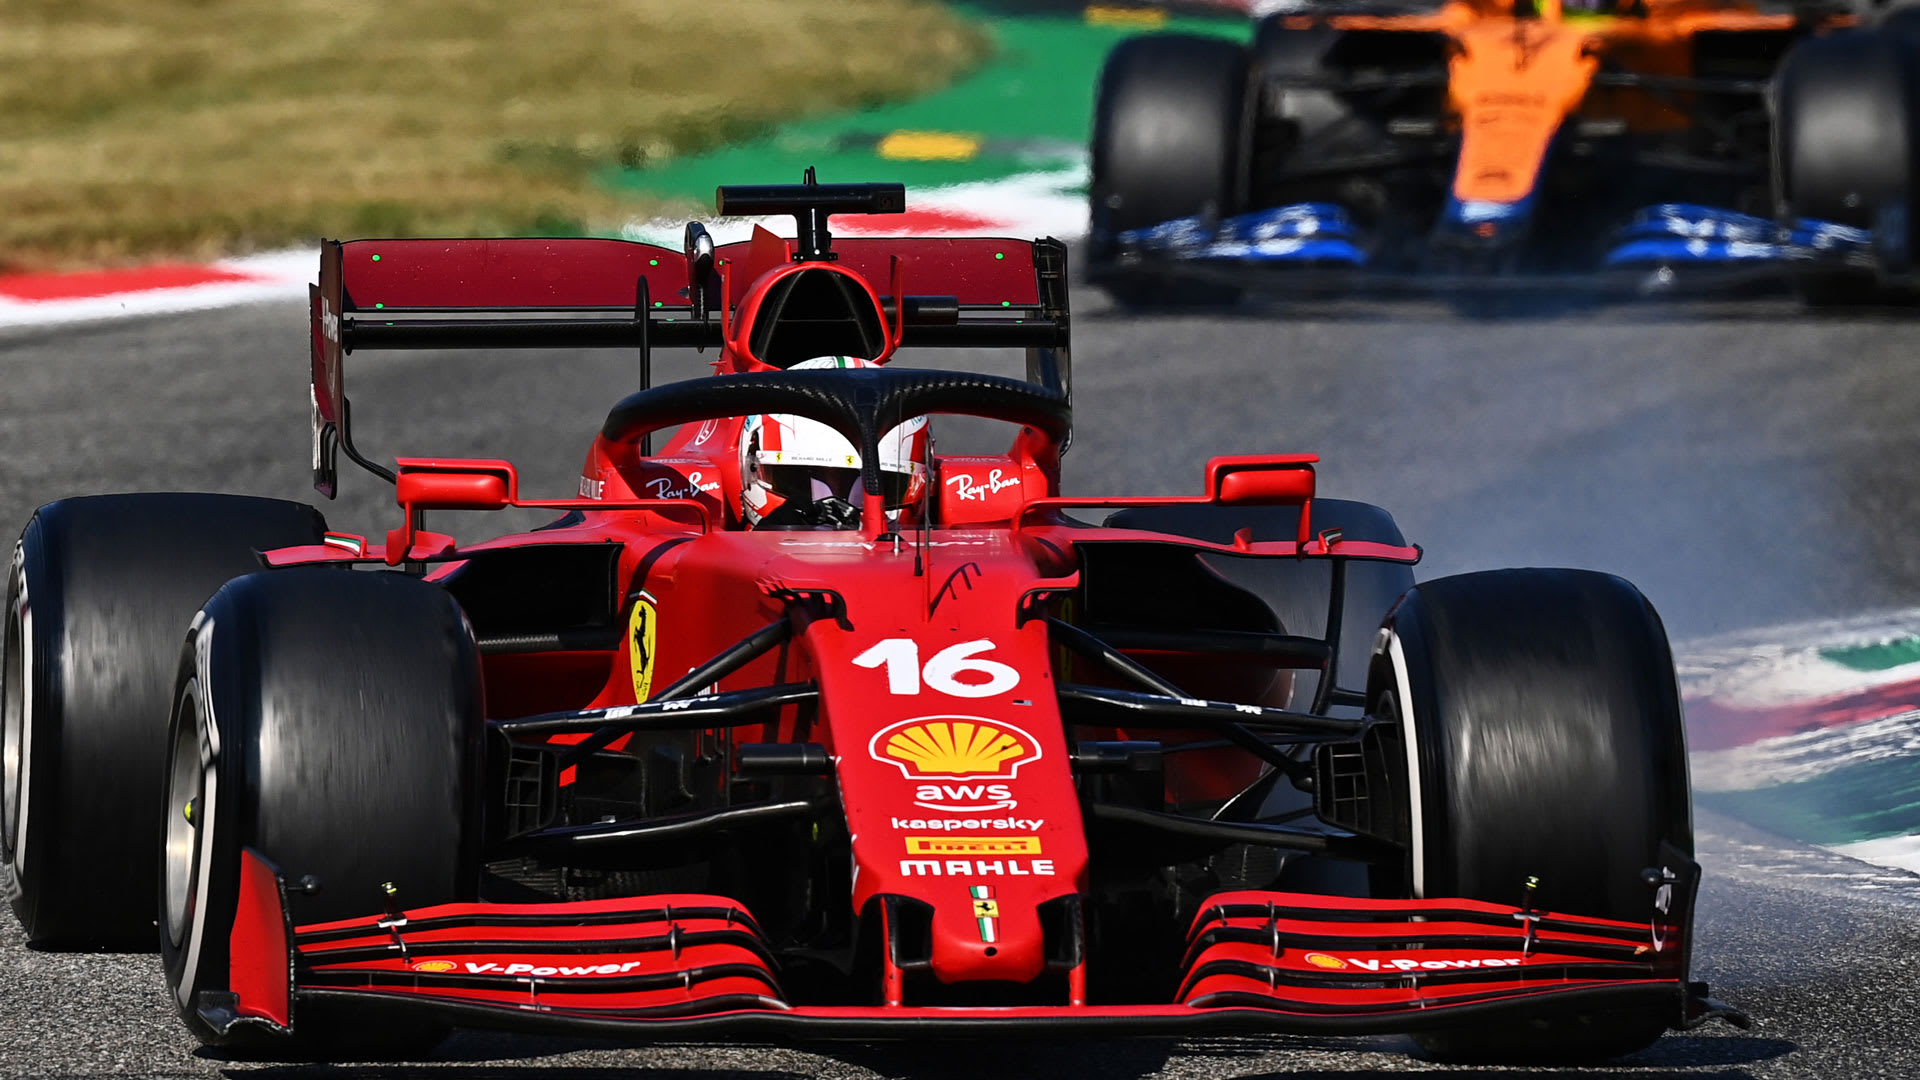 Leclerc confident Ferrari can hunt down McLaren for P3 as he expects a ‘strong race’ for the Scuderia in Mexico